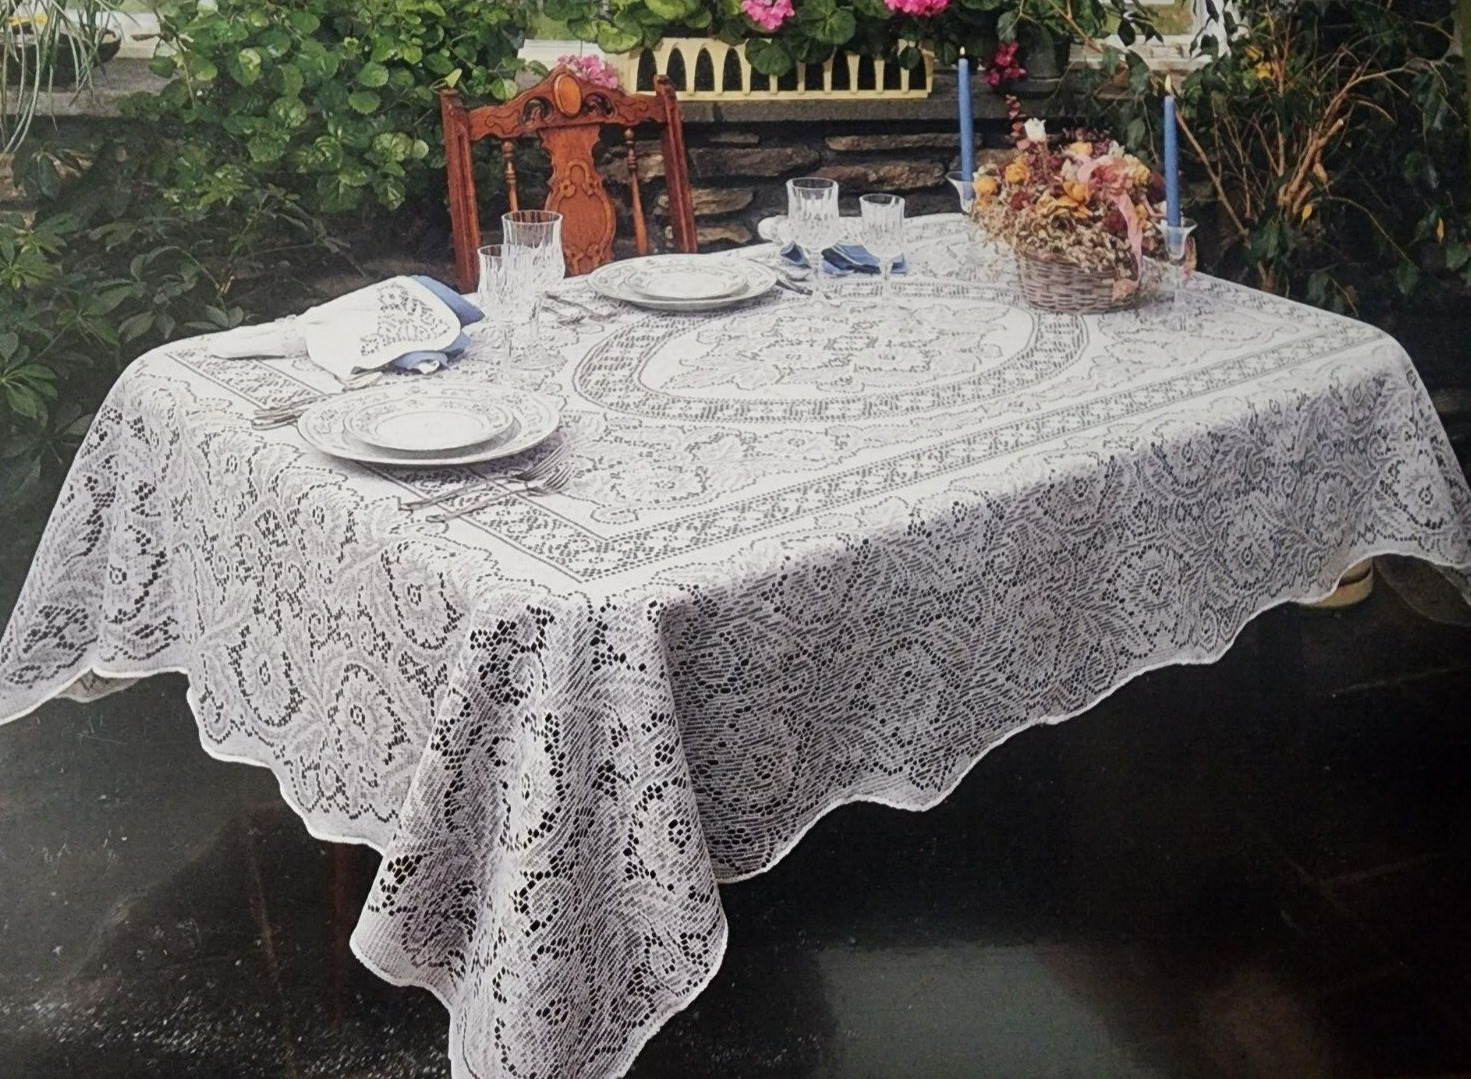 Scranton Lace Woven Nottingham Hyde Park Tablecloth Cover 60 X 126 USA MADE